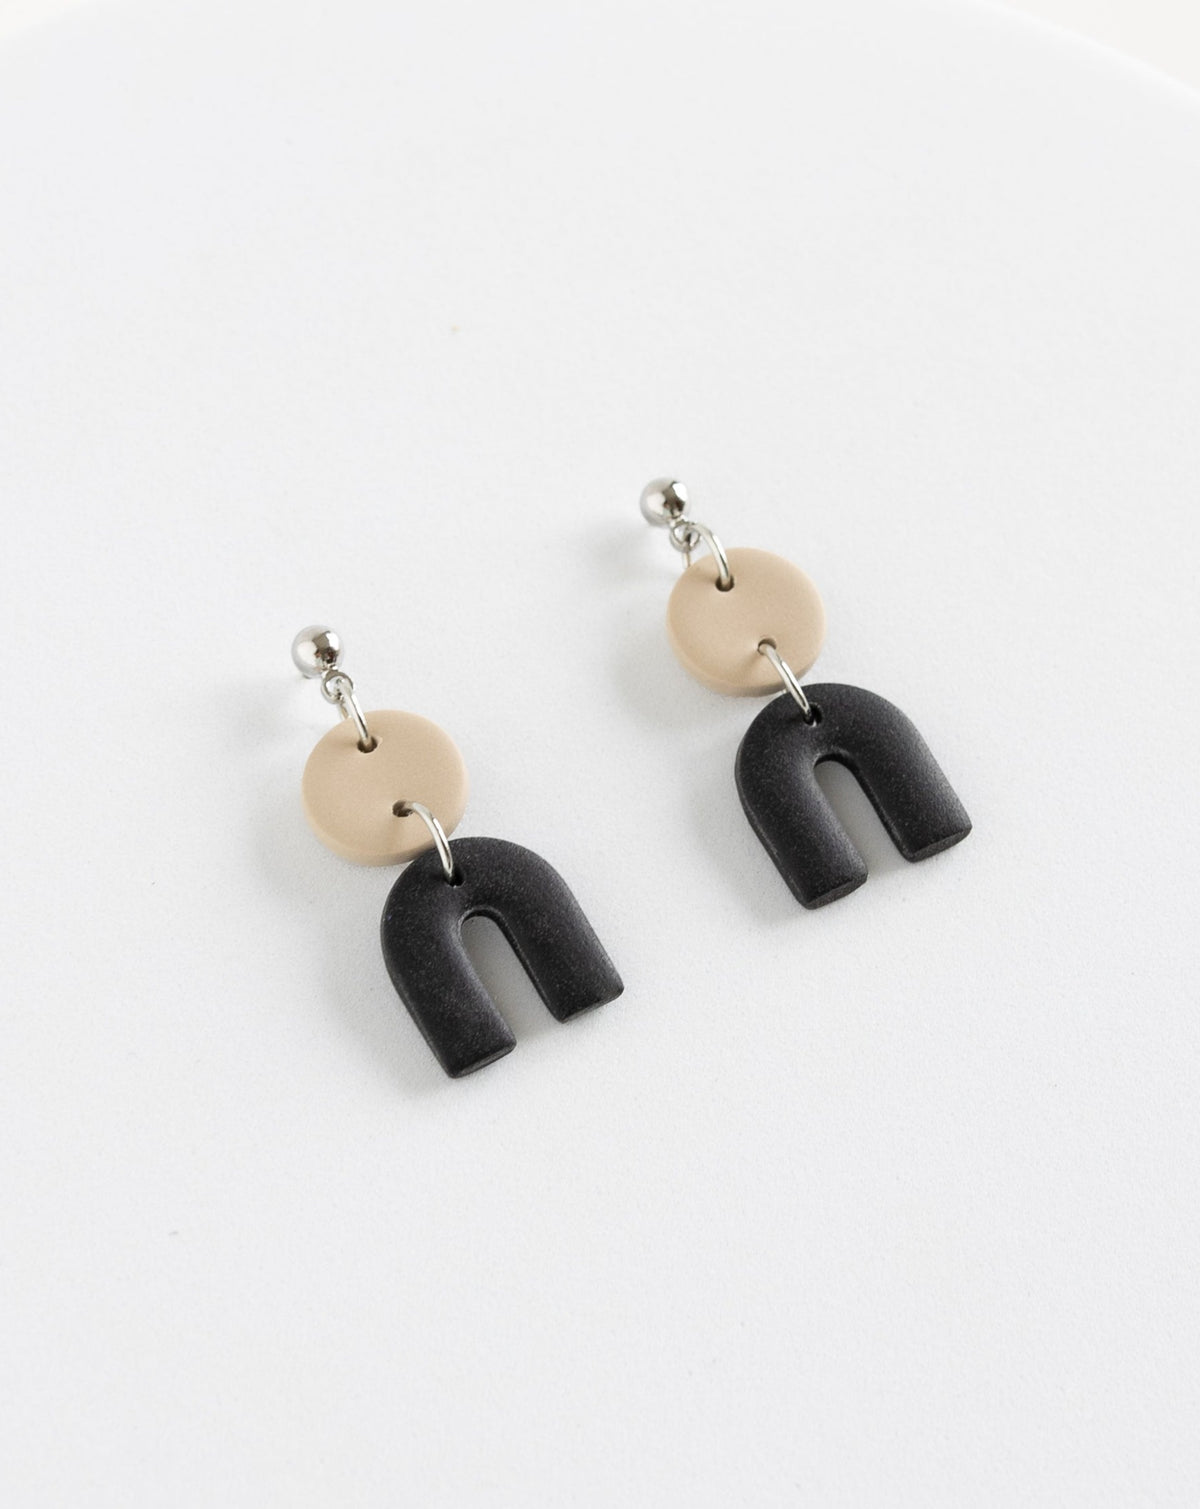 Tiny Arch earrings in two part of Beige and black clay parts with silver Ball studs, angled view.